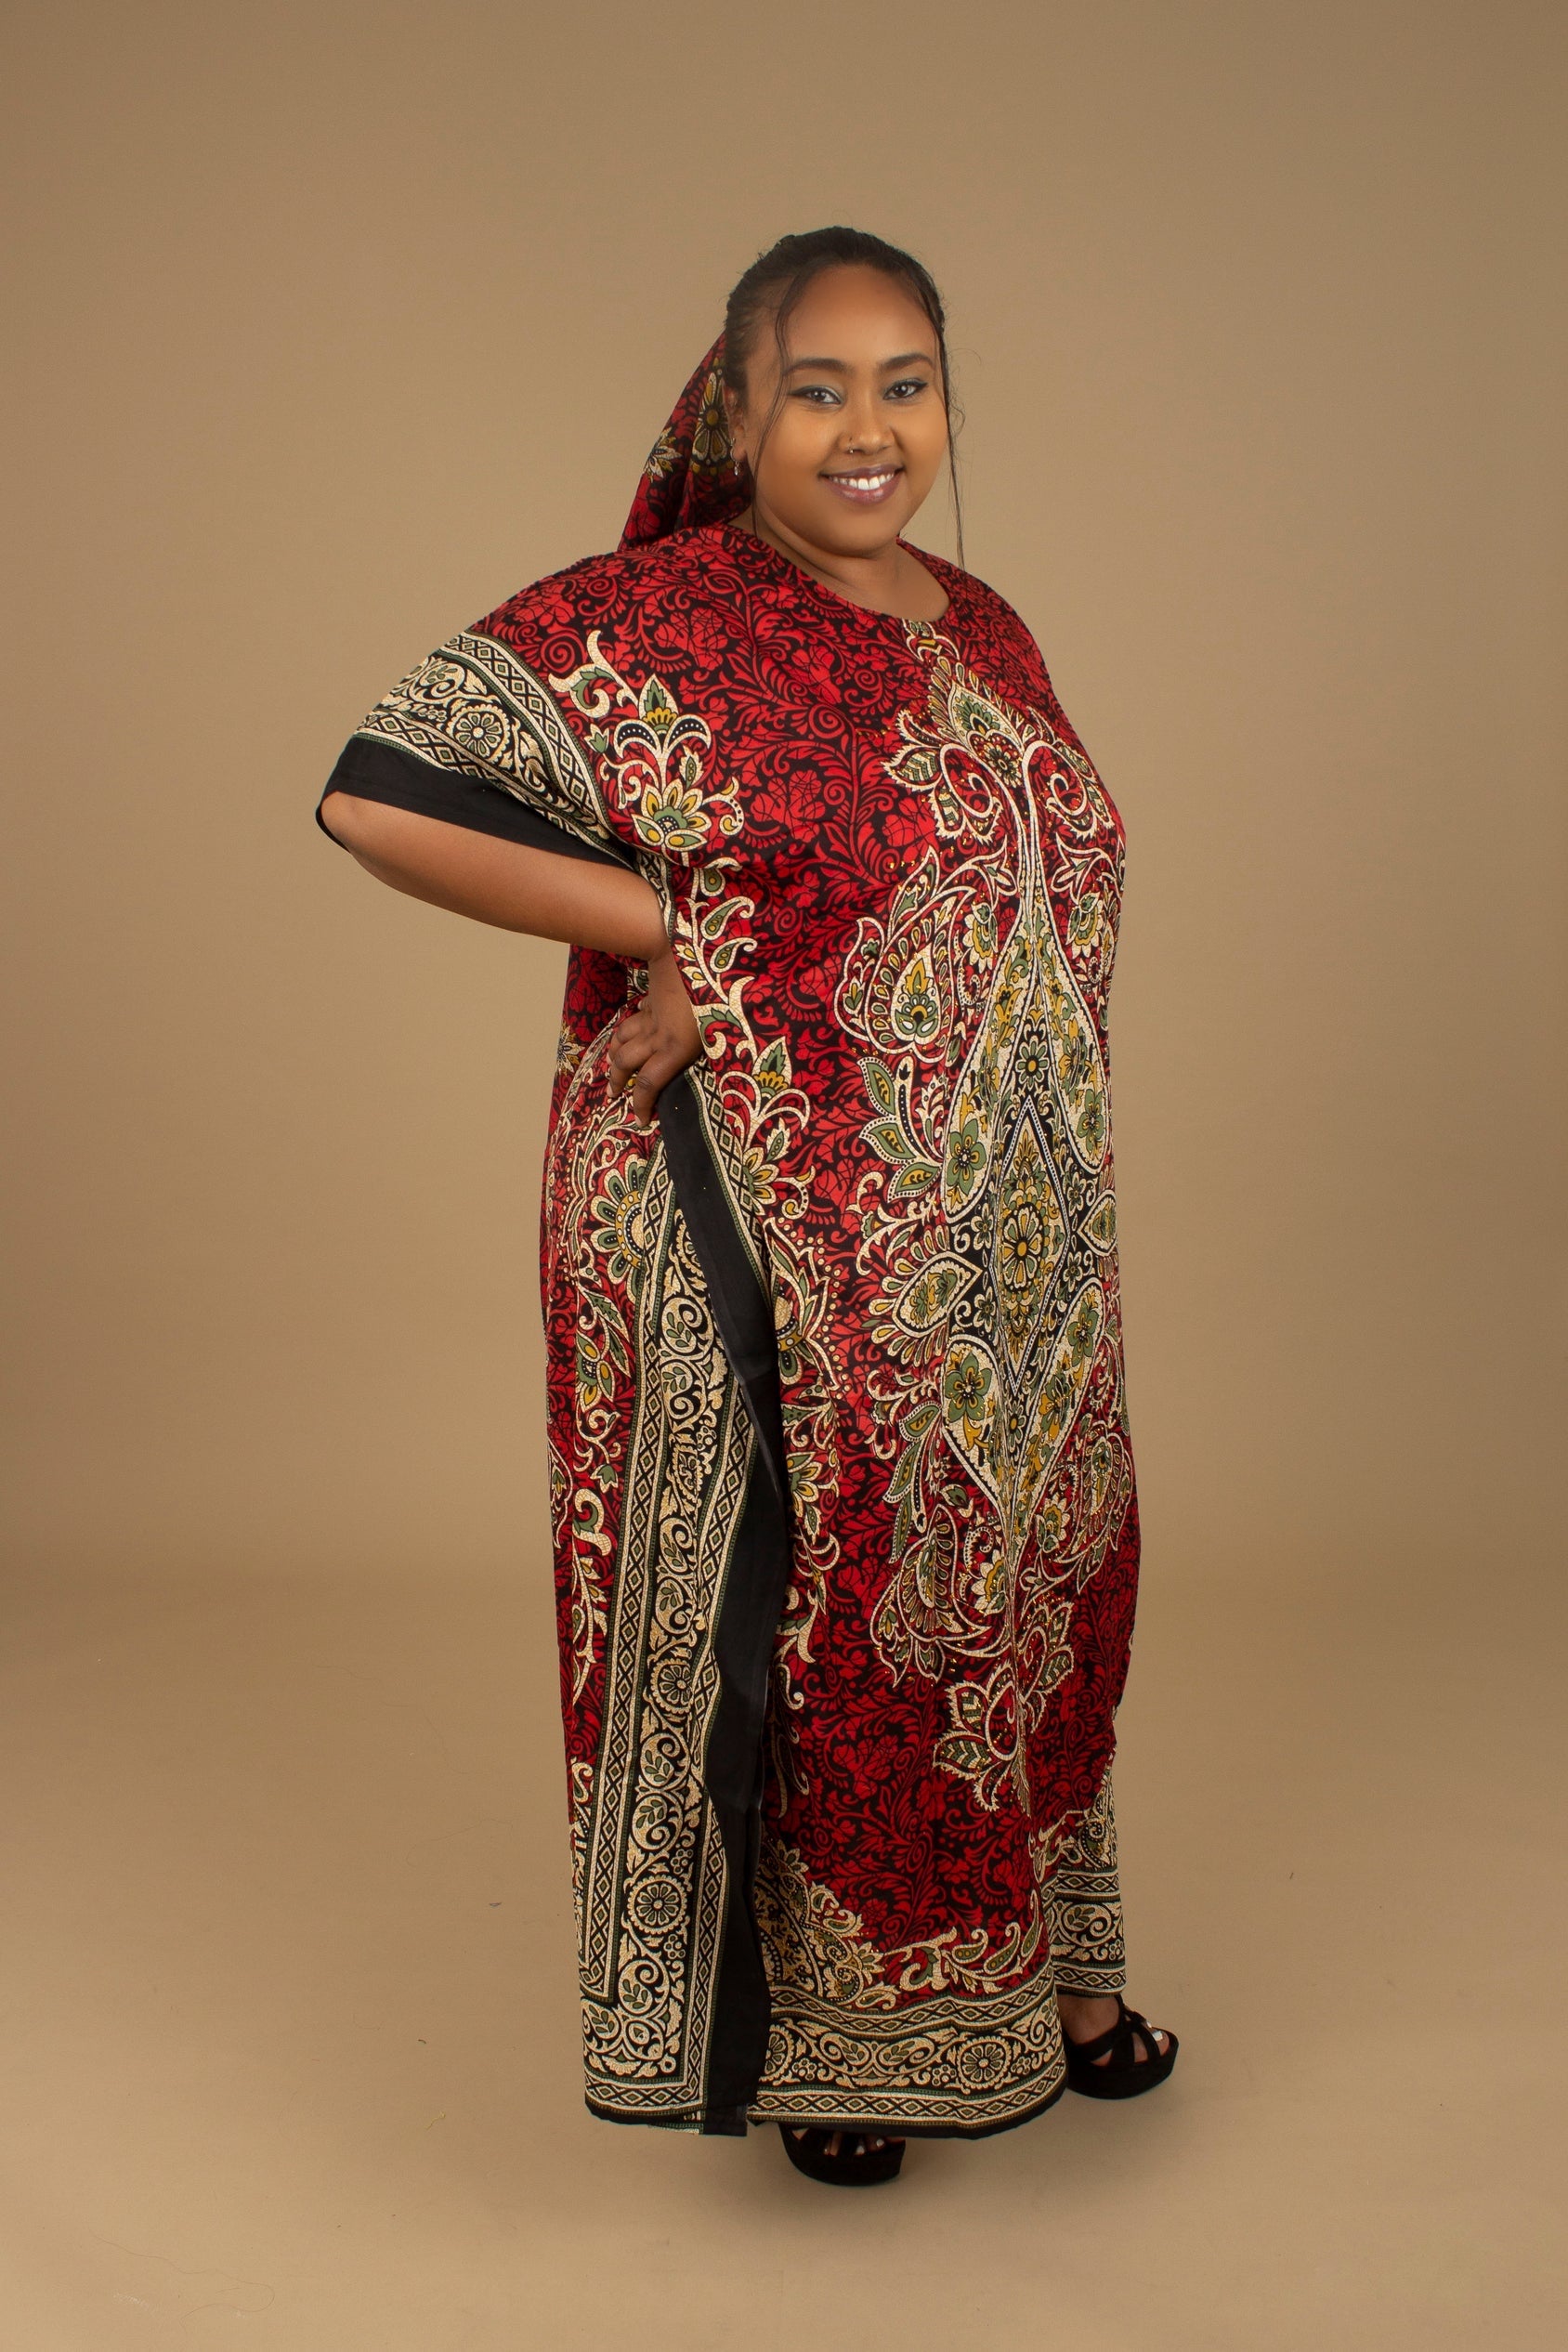 The Dashiki Floor Length Kaftan Dress in a lightweight Chiffon Fabric in a gorgeous rich red, white, black and gold floral mandala African Print pattern. Designed in England Made in Nigeria. 